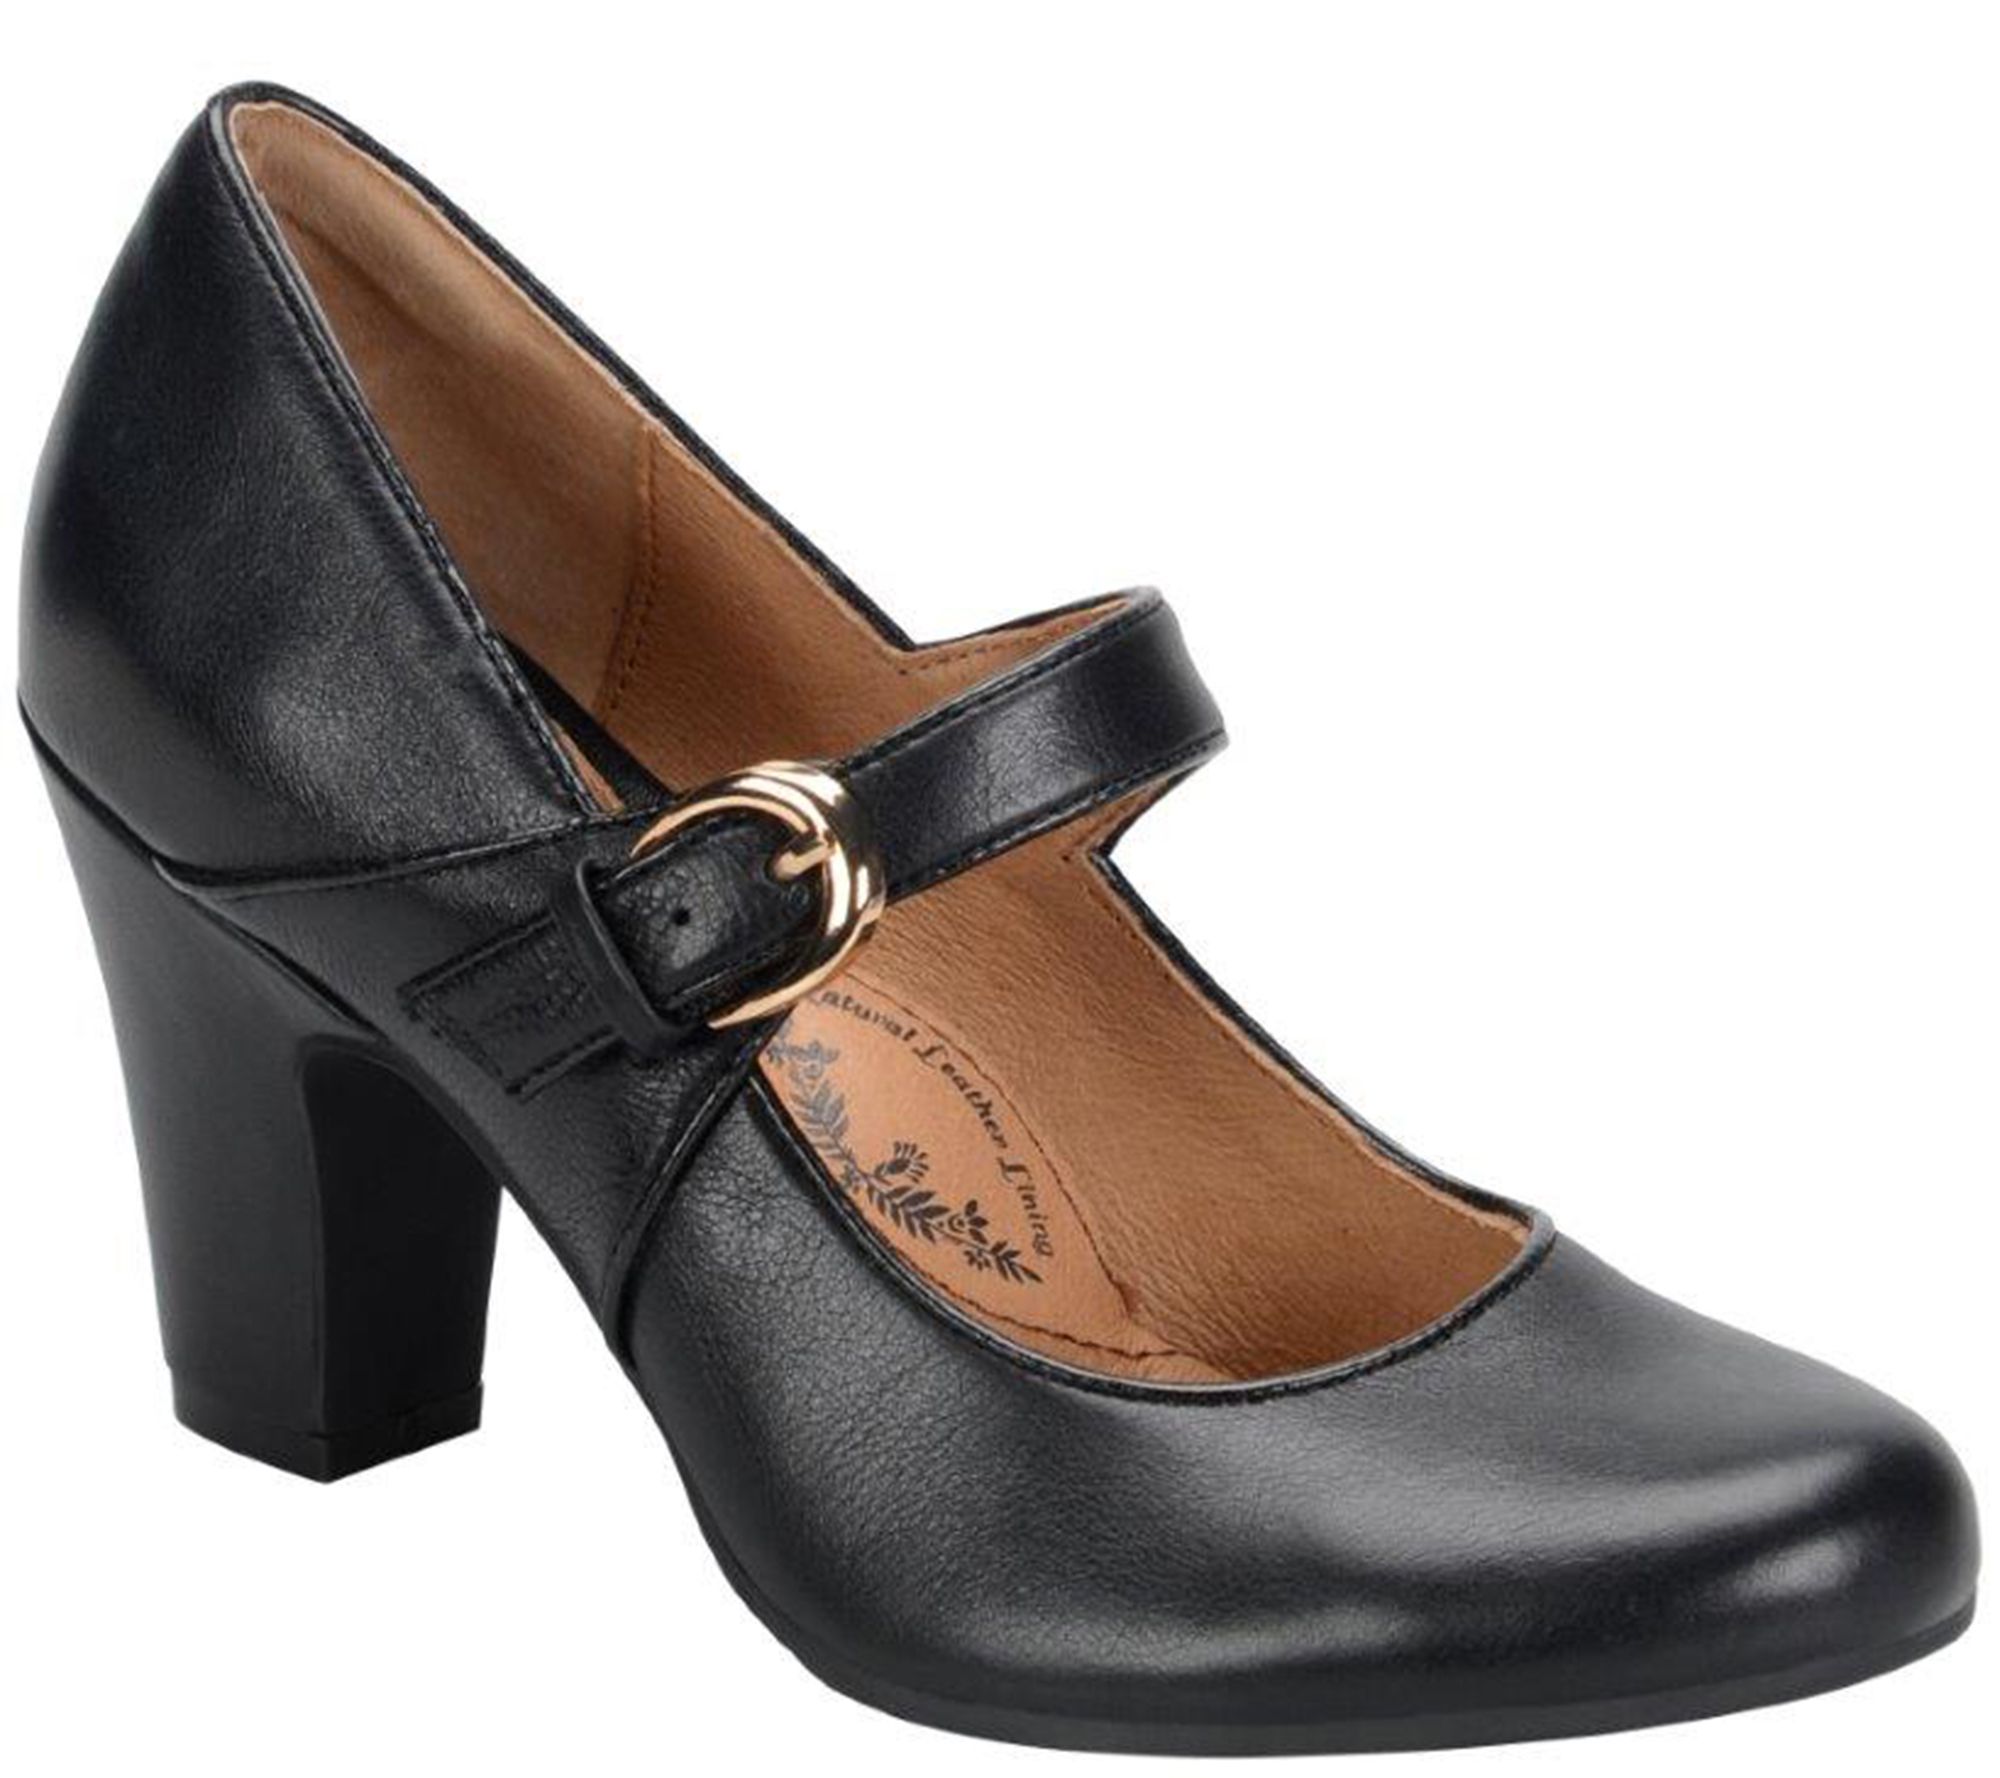 Sofft Leather Mary Jane Pumps - Miranda 